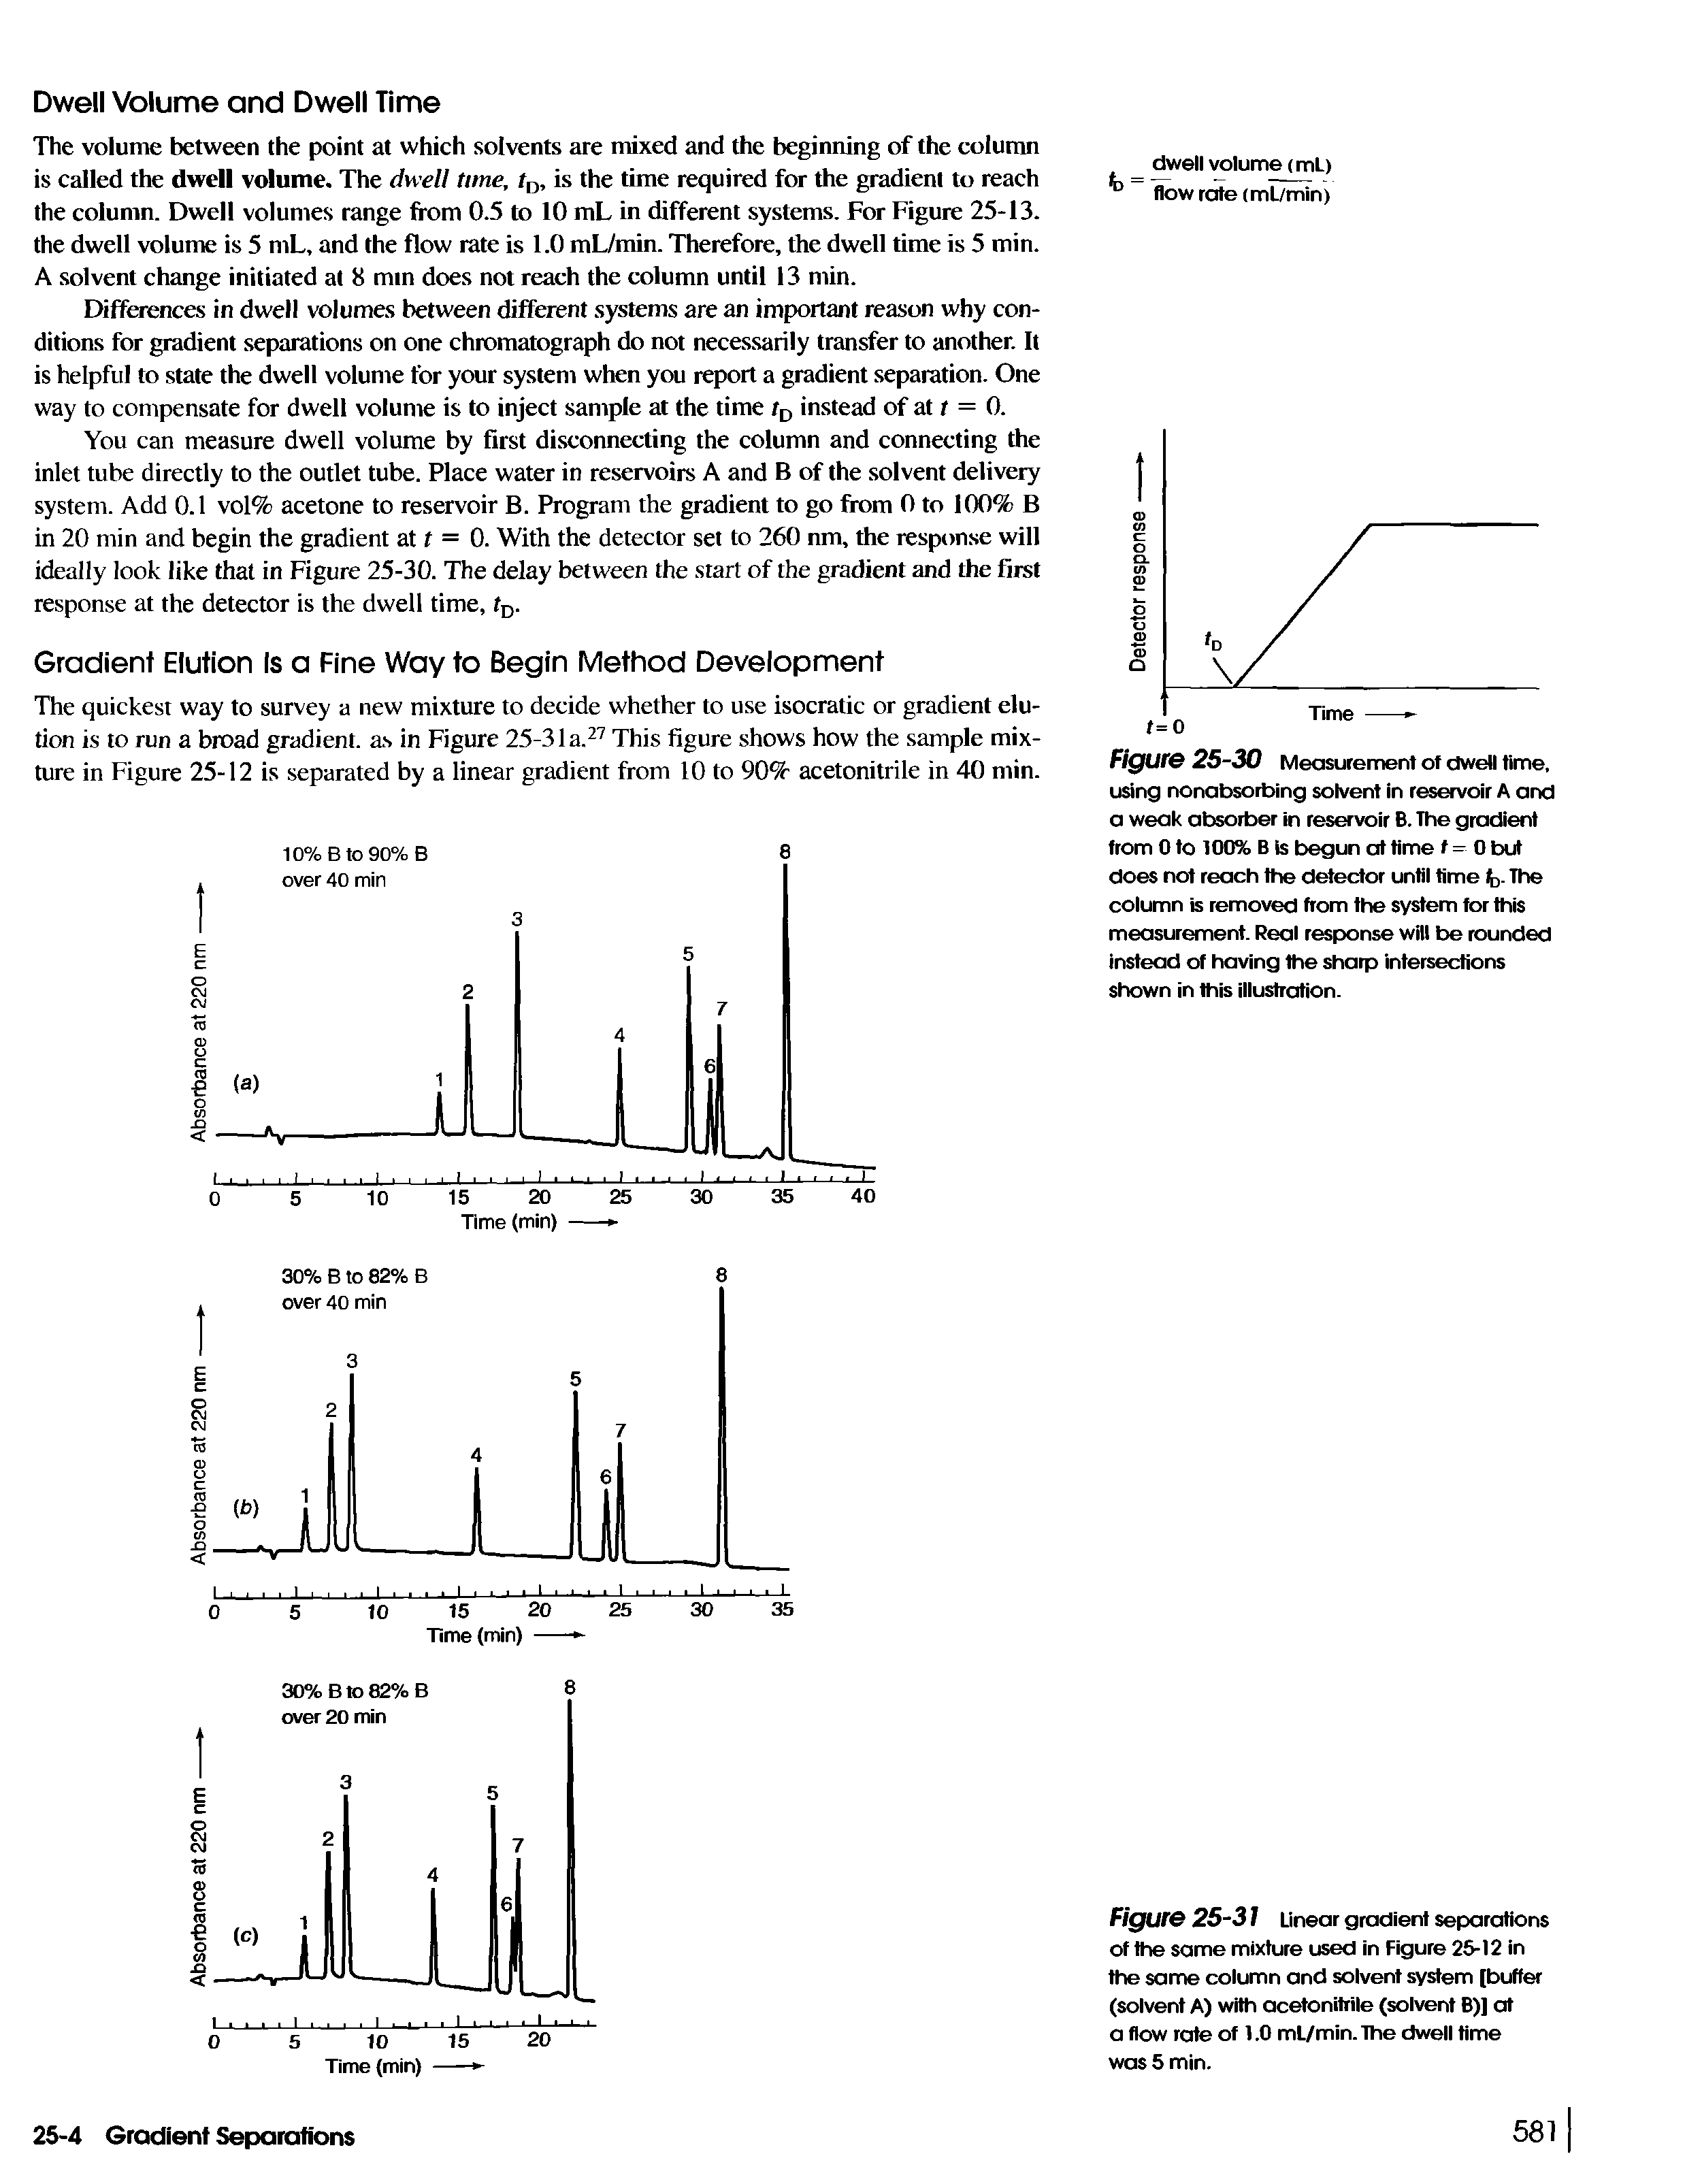 Figure 25-30 Measurement of dwell time, using nonabsorbing solvent in reservoir A and a weak absorber in reservoir B. The gradient from 0 to 100% B is begun at time f = 0 but does not reach the detector until time fc. The column is removed from the system for this measurement. Real response will be rounded instead of having the sharp intersections shown in this illustration.